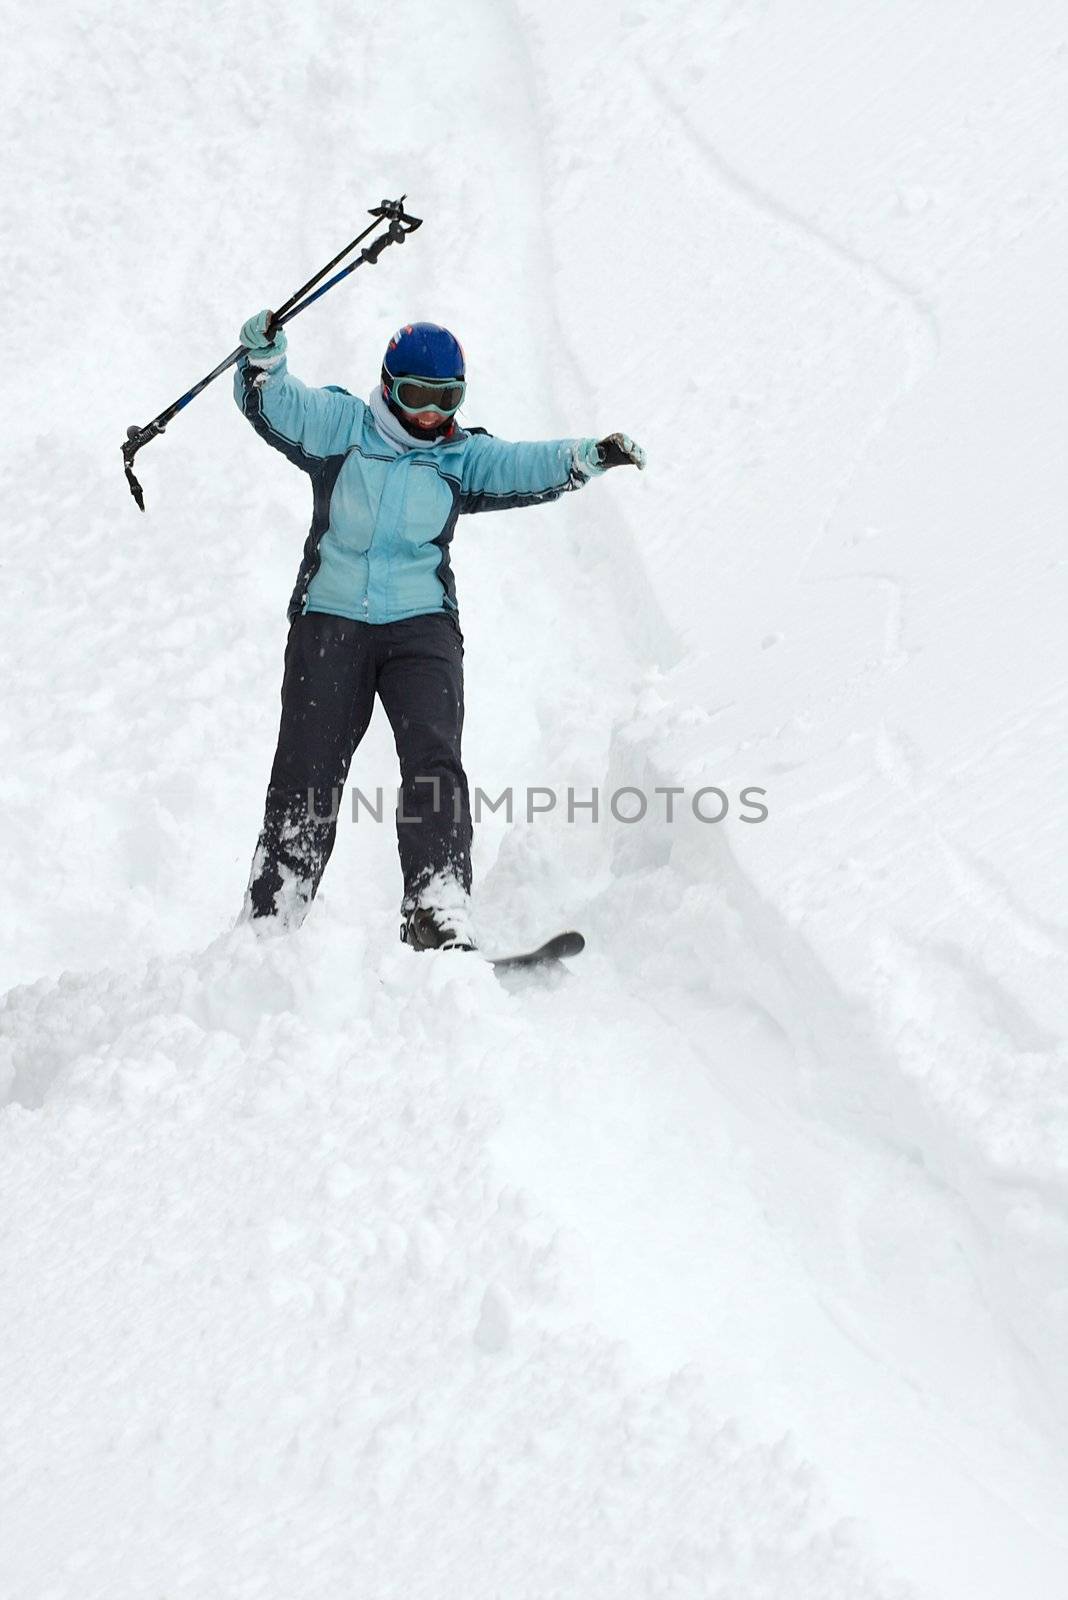 Skier coming down on an off-piste slope with fresh snow